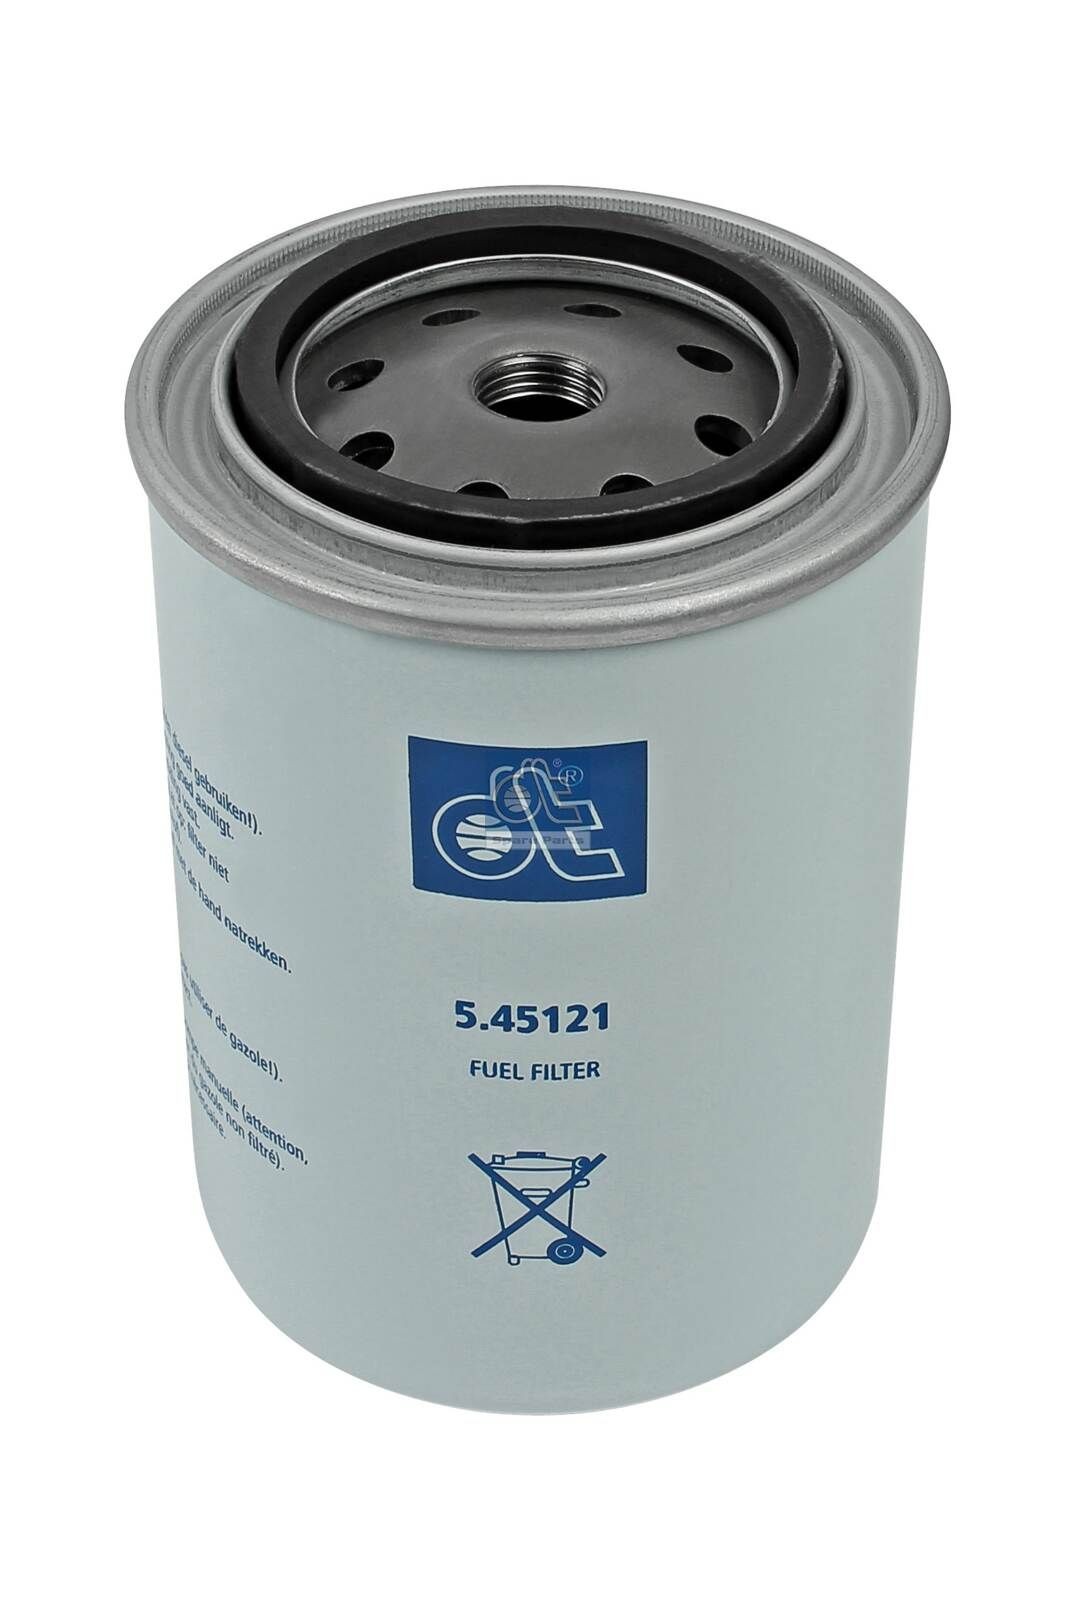 WDK 940/5 DT Spare Parts 5.45121 Fuel filter 217 774 51